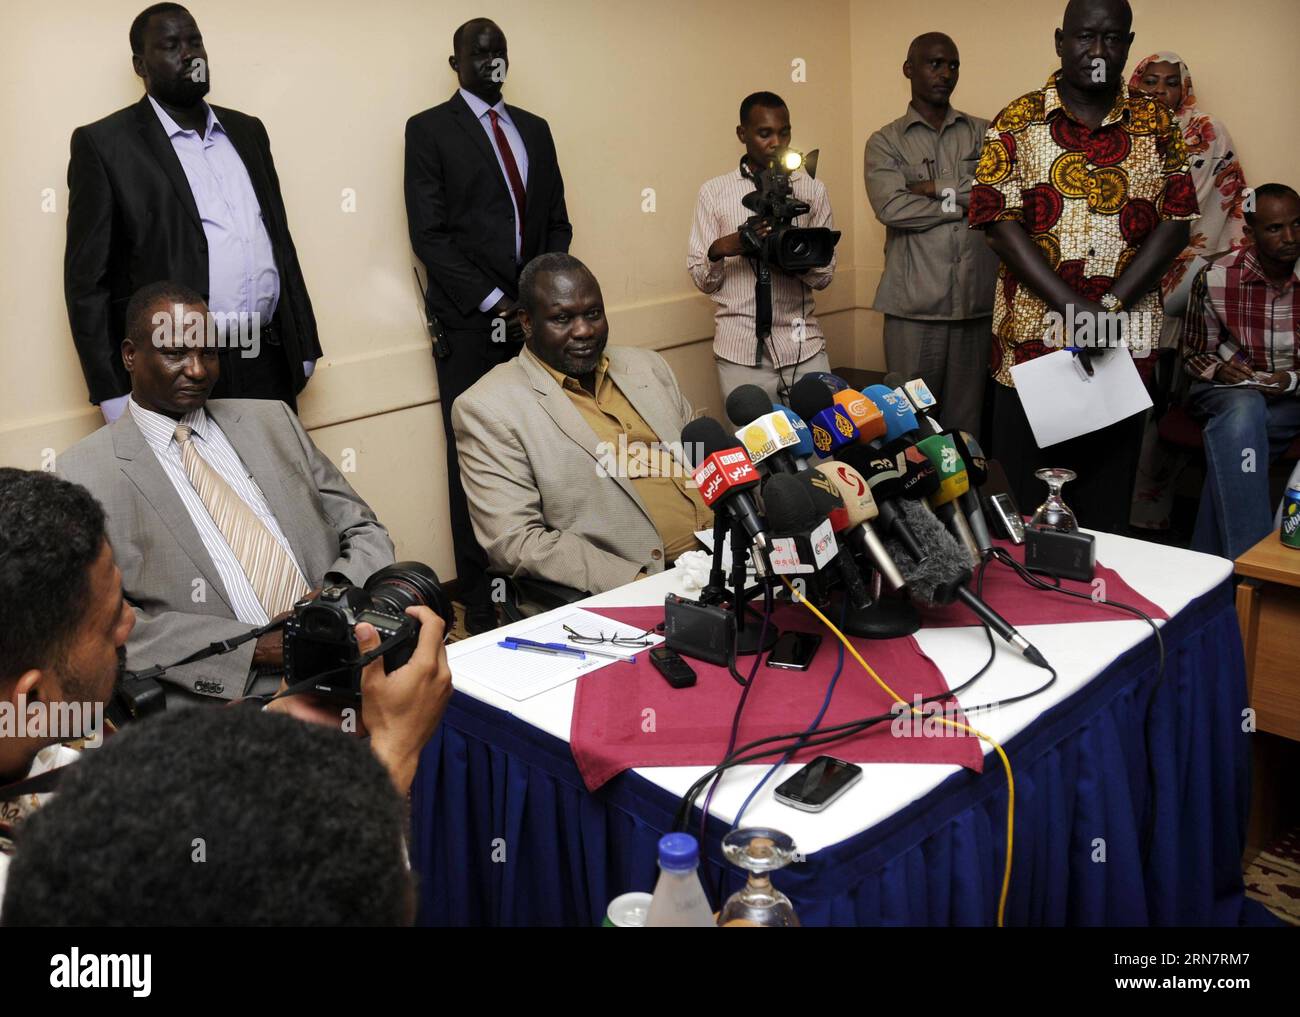 (150918) -- KHARTOUM, Sept. 18, 2015 -- South Sudan rebel leader Riek Machar attends a press conference in Khartoum, Sudan, on Sept. 18, 2015. South Sudan rebel leader Riek Machar on Friday accused the government army of systematic violation of the ceasefire by attacking the rebel positions, particularly in the oil-rich Upper Nile State. ) SUDAN-KHARTOUM-REBEL-LEADER-GOVERNMENT-CEASEFIRE VIOLATION-ACCUSATION HohammedxBabiker PUBLICATIONxNOTxINxCHN   Khartoum Sept 18 2015 South Sudan Rebel Leader Riek Machar Attends a Press Conference in Khartoum Sudan ON Sept 18 2015 South Sudan Rebel Leader R Stock Photo